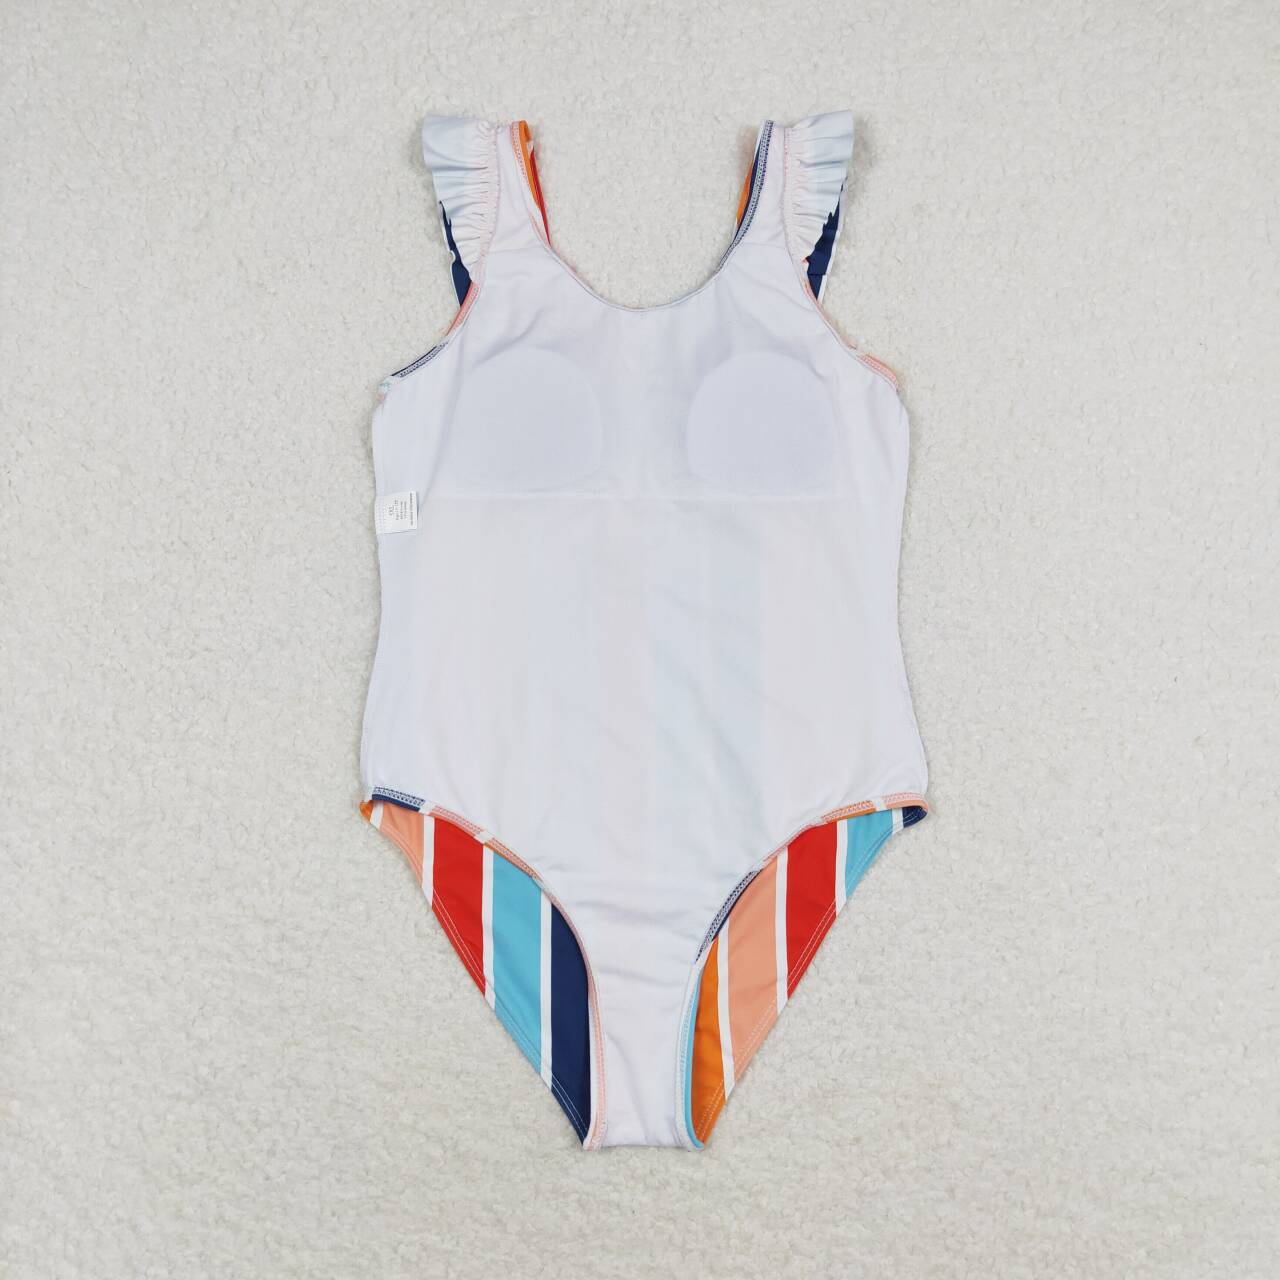 S0341 Colorful striped one-piece swimsuit